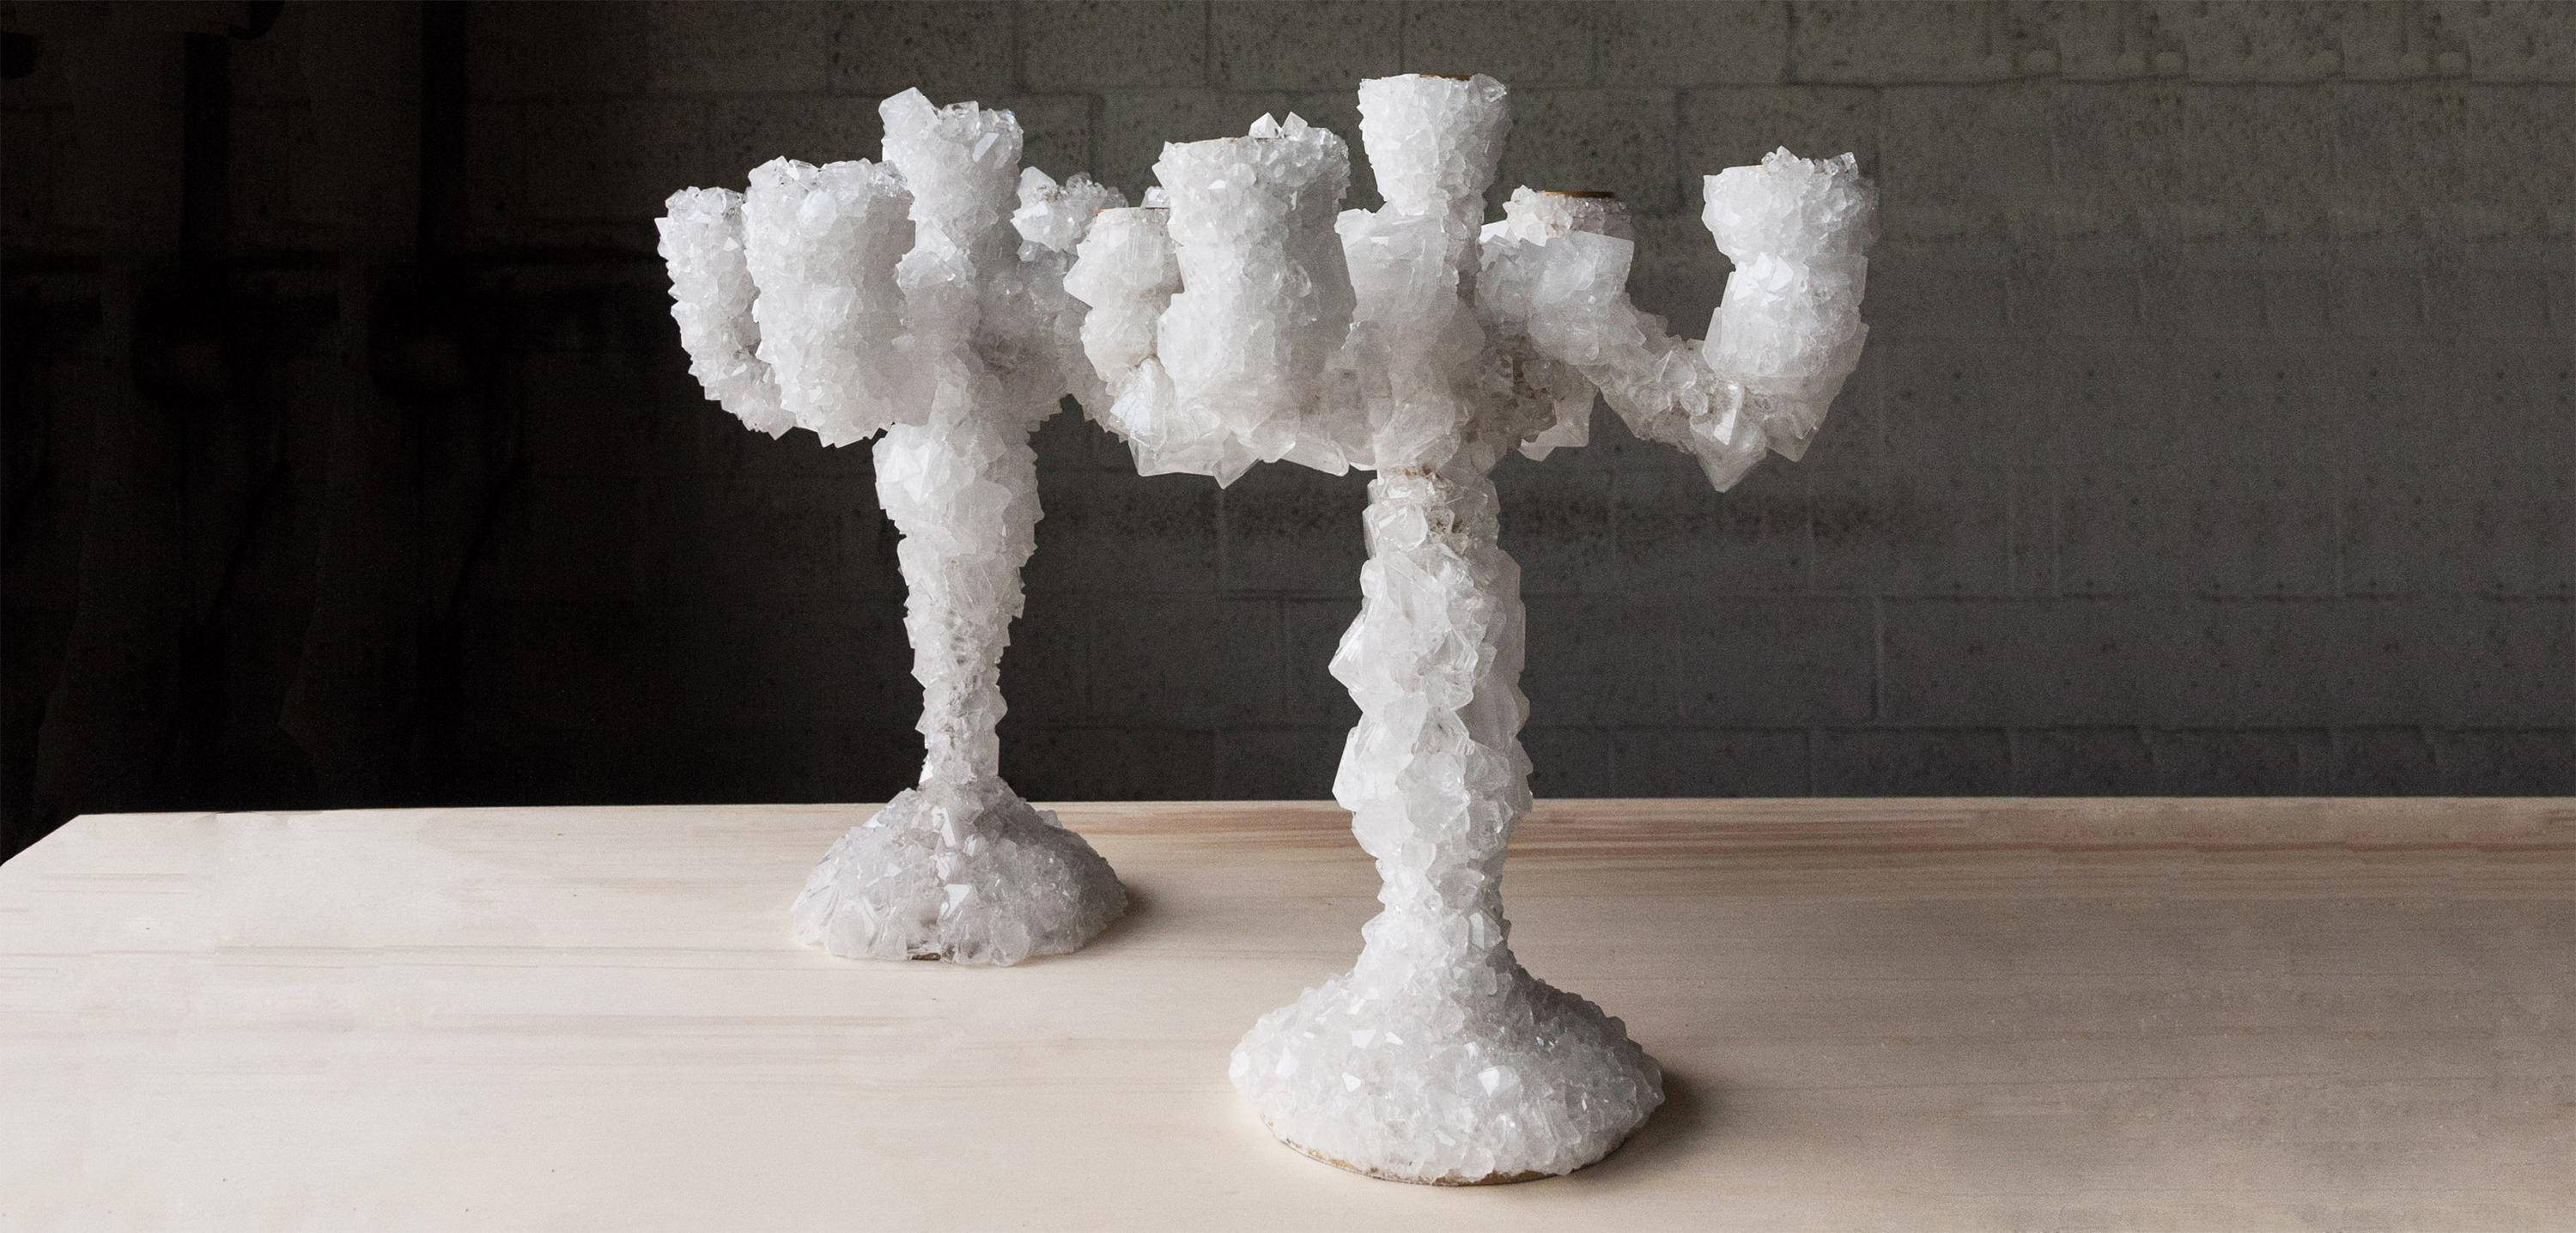 Pair of XL crystal overgrown candelabras, Mark Sturkenboom
Hand sculpted unique design artwork by Mark Sturkenboom
Dimensions: 8 x 40 x 62 cm
Material: aluminium candleholder, natural grown crystal
Detail: crystal can also be in grey /